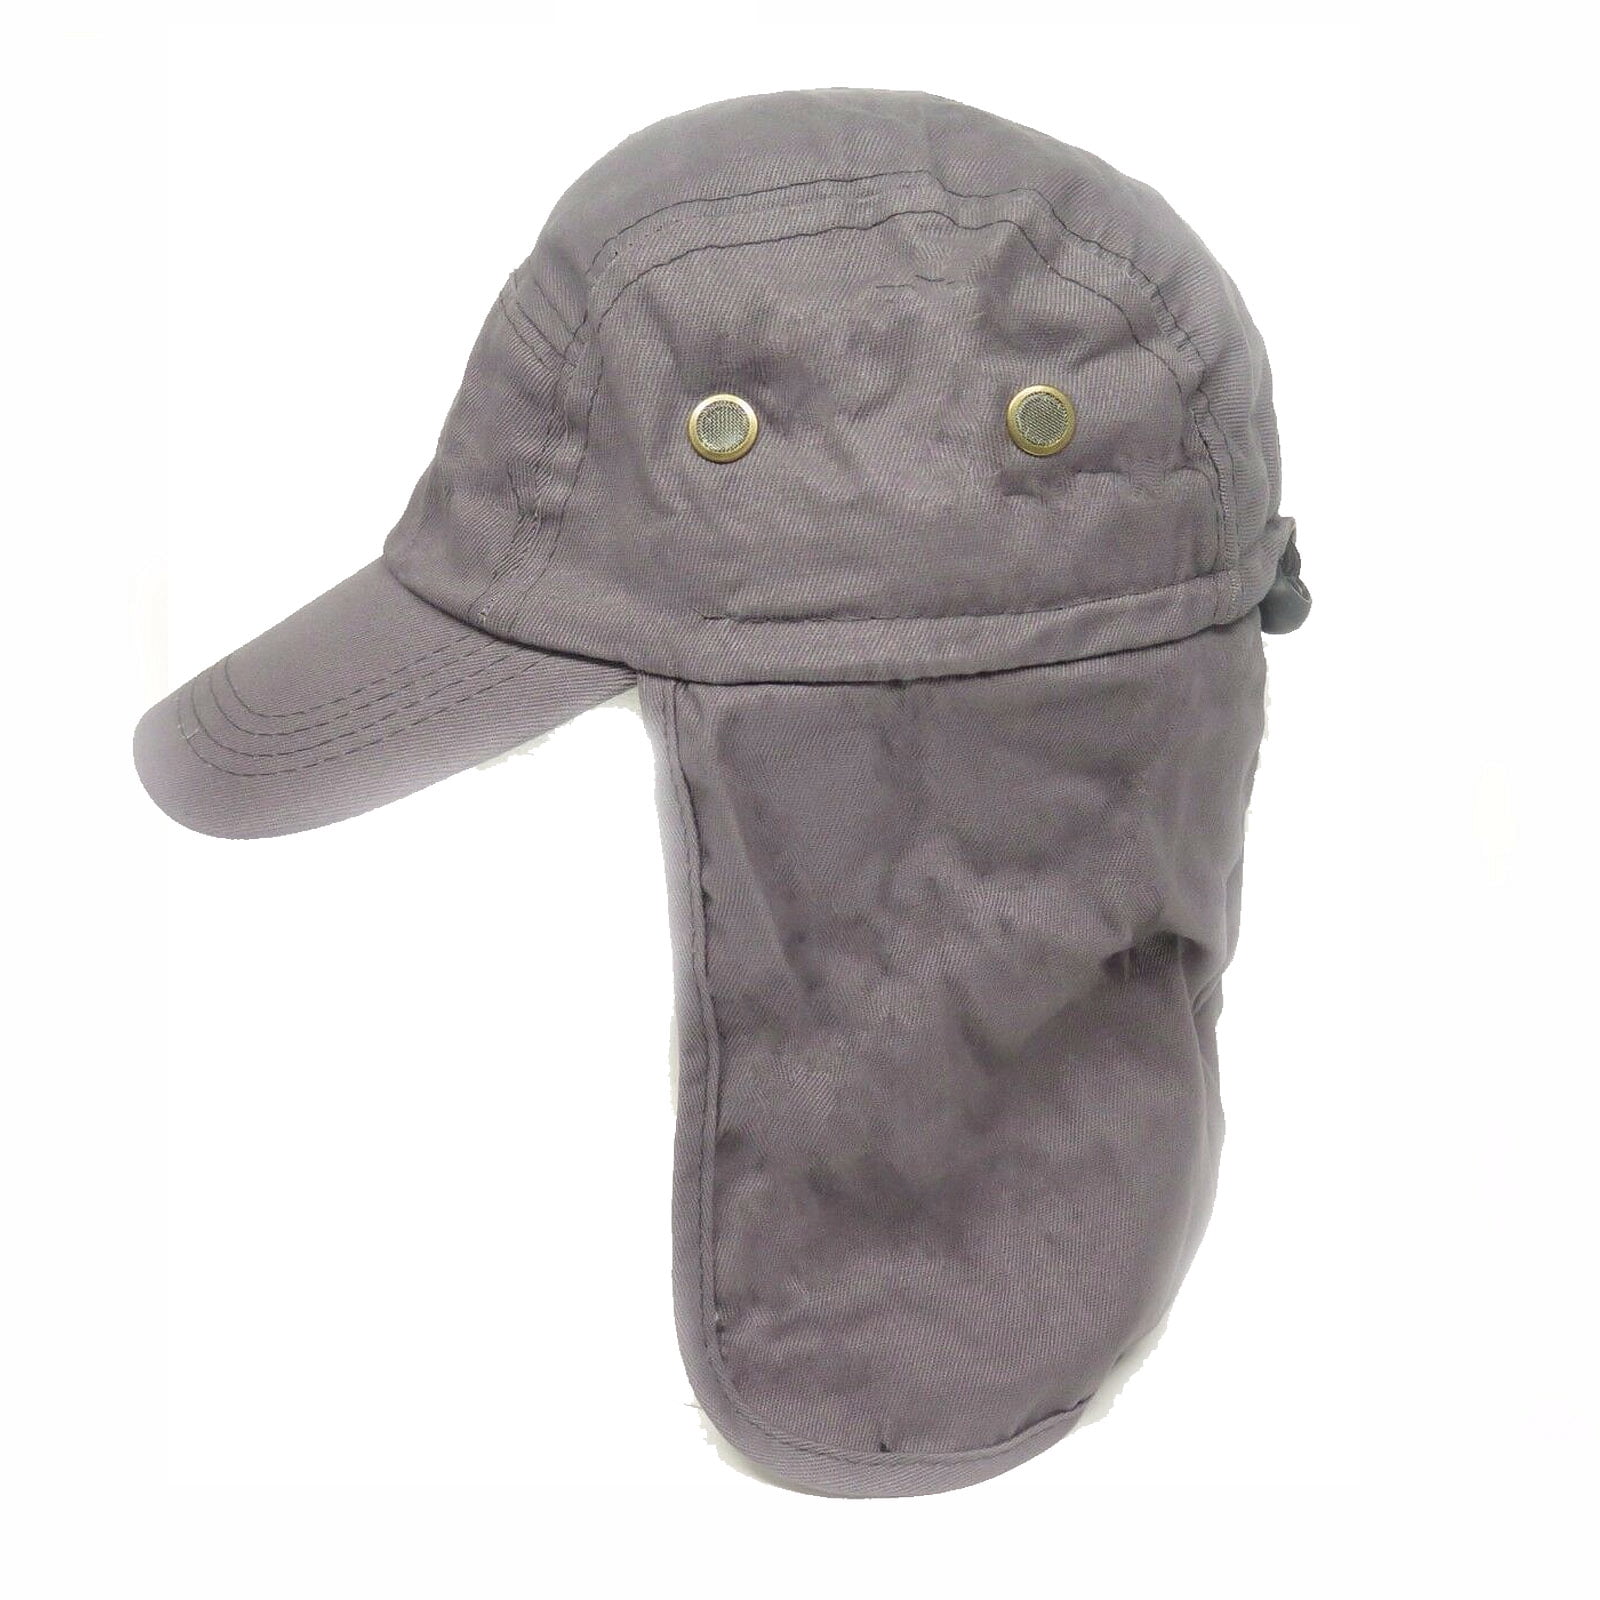 Sun Neck Protector Hiking Army Military Snap Brim Cap With Ear and